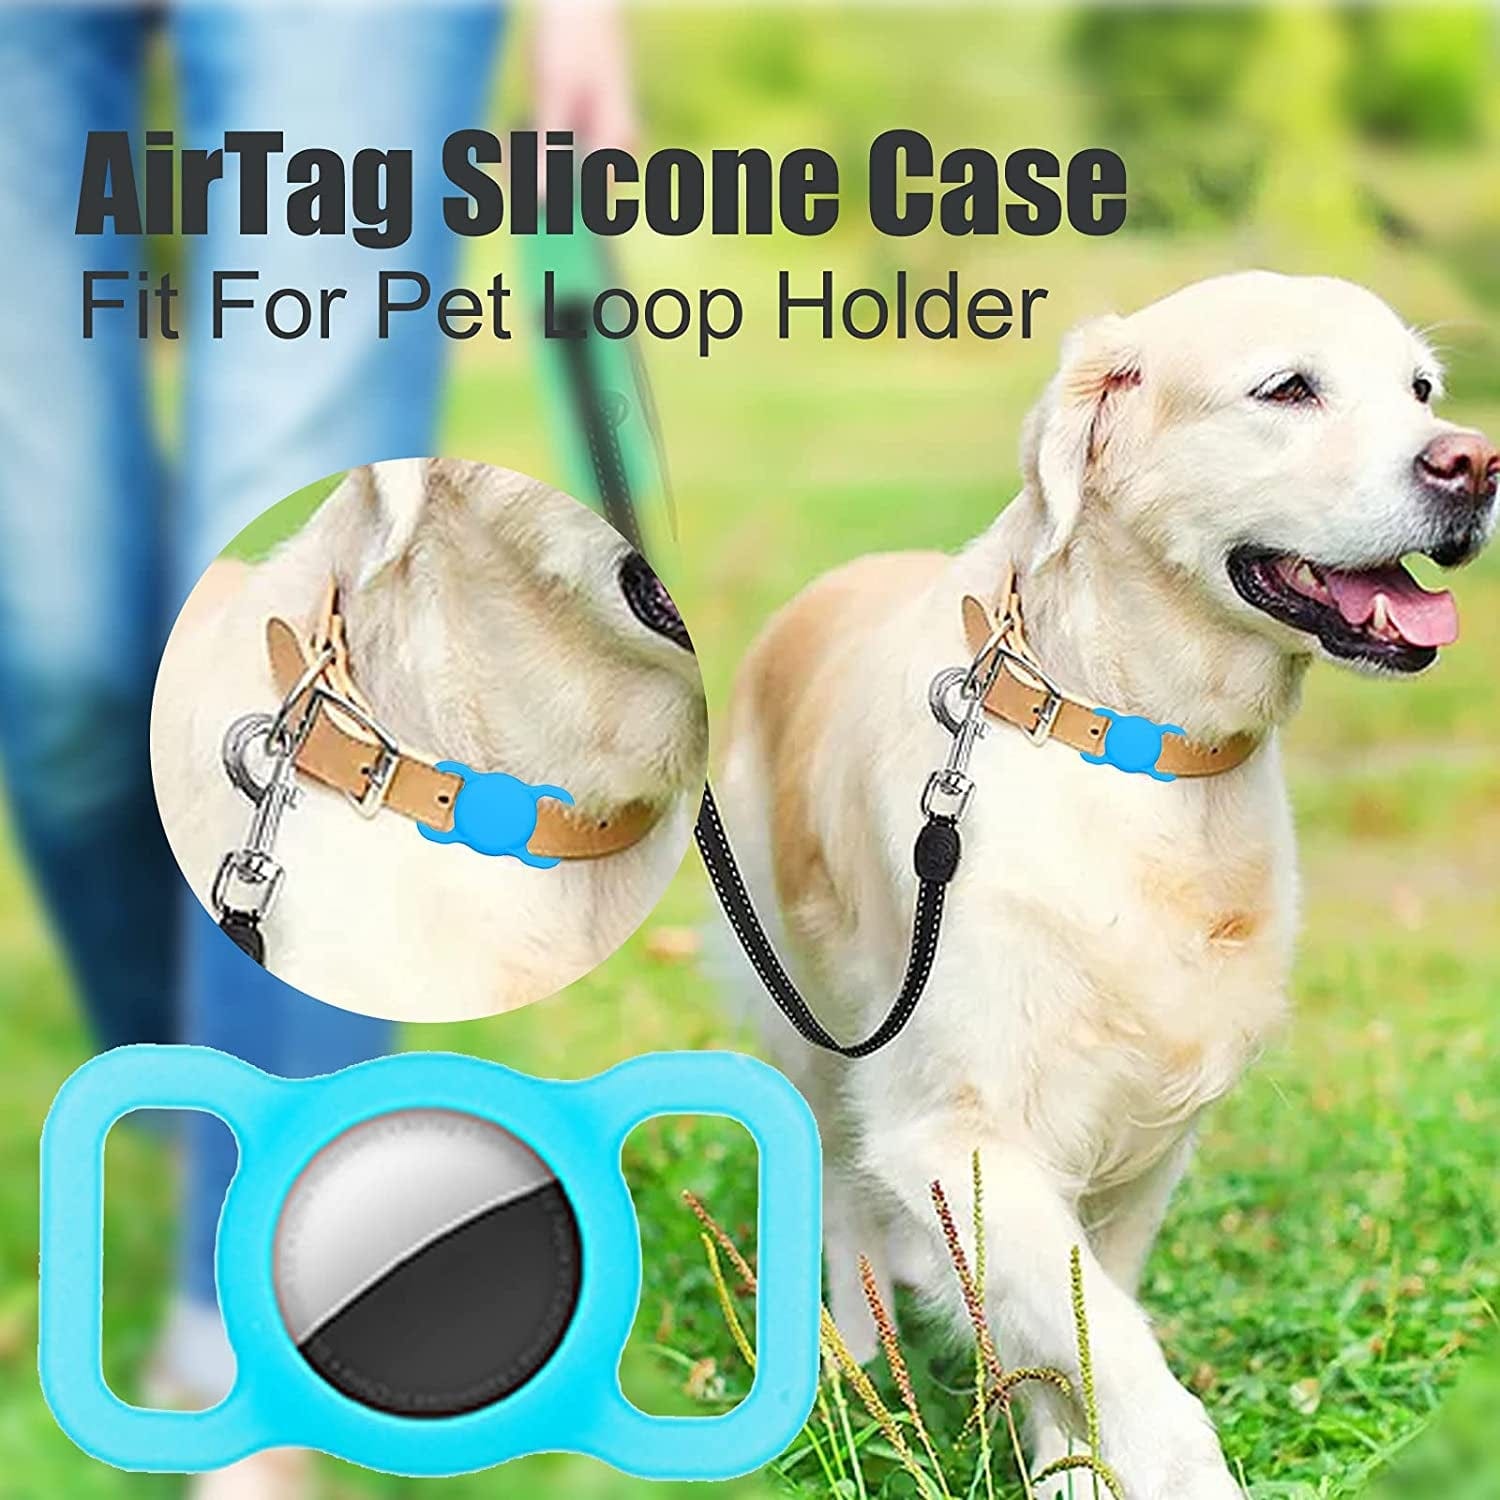 2 Pcs Airtag Case Compatible with Apple Airtag,Silicone Air Tag Holder for Dog Cat Collar Cover Anti-Lost and Scratch,Gps Tracking Accessories Pet Loop Holder,Midnight Blue